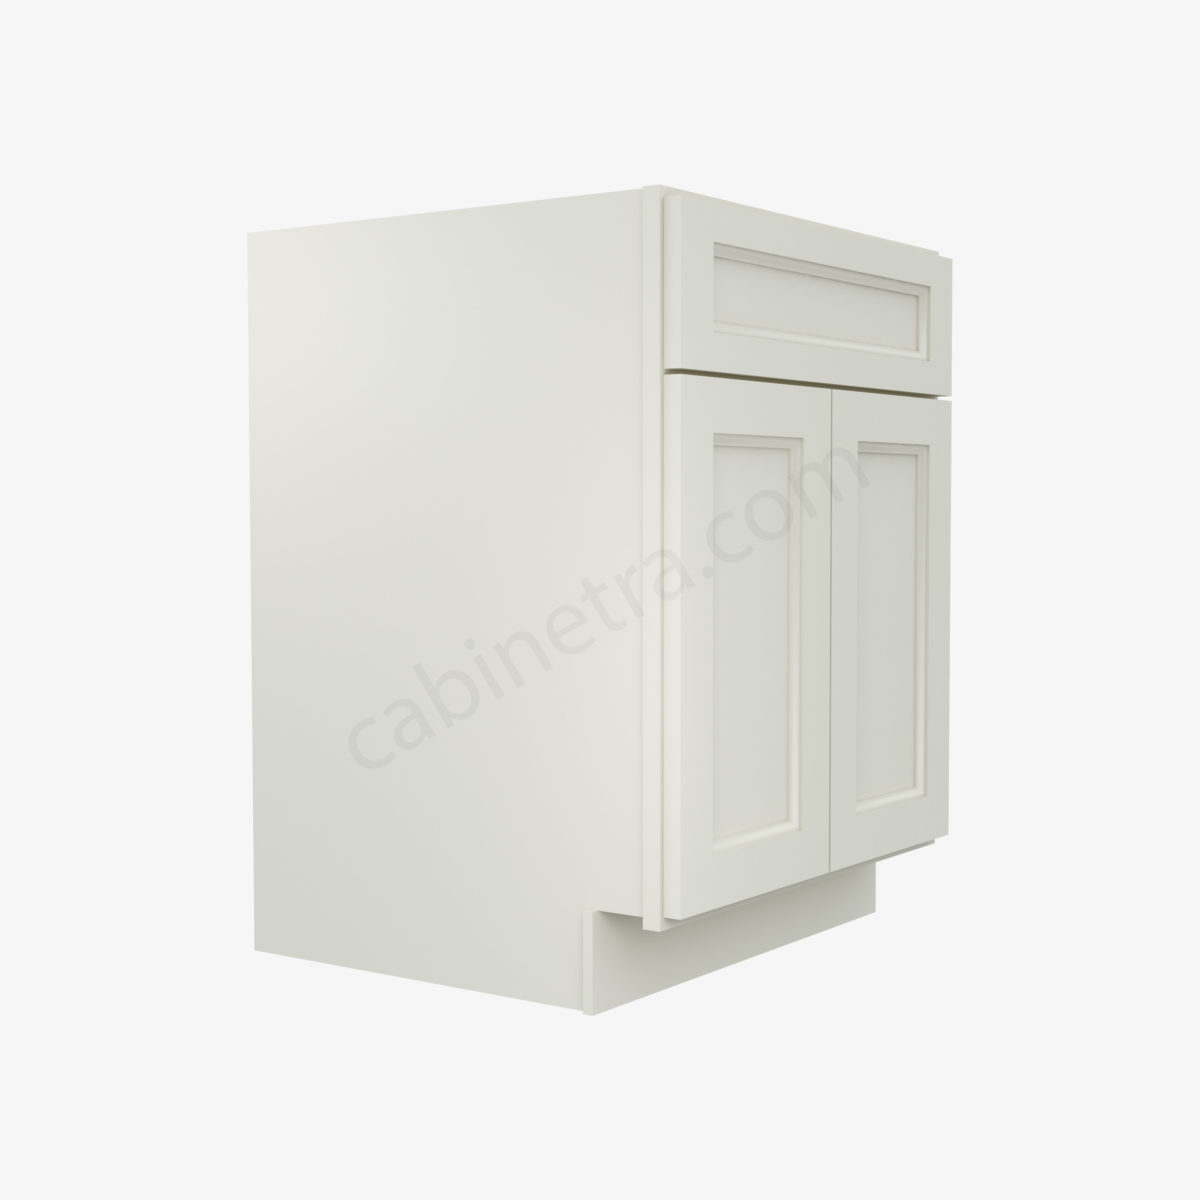 TQ B24B 4 Forevermark Townplace Crema Cabinetra scaled